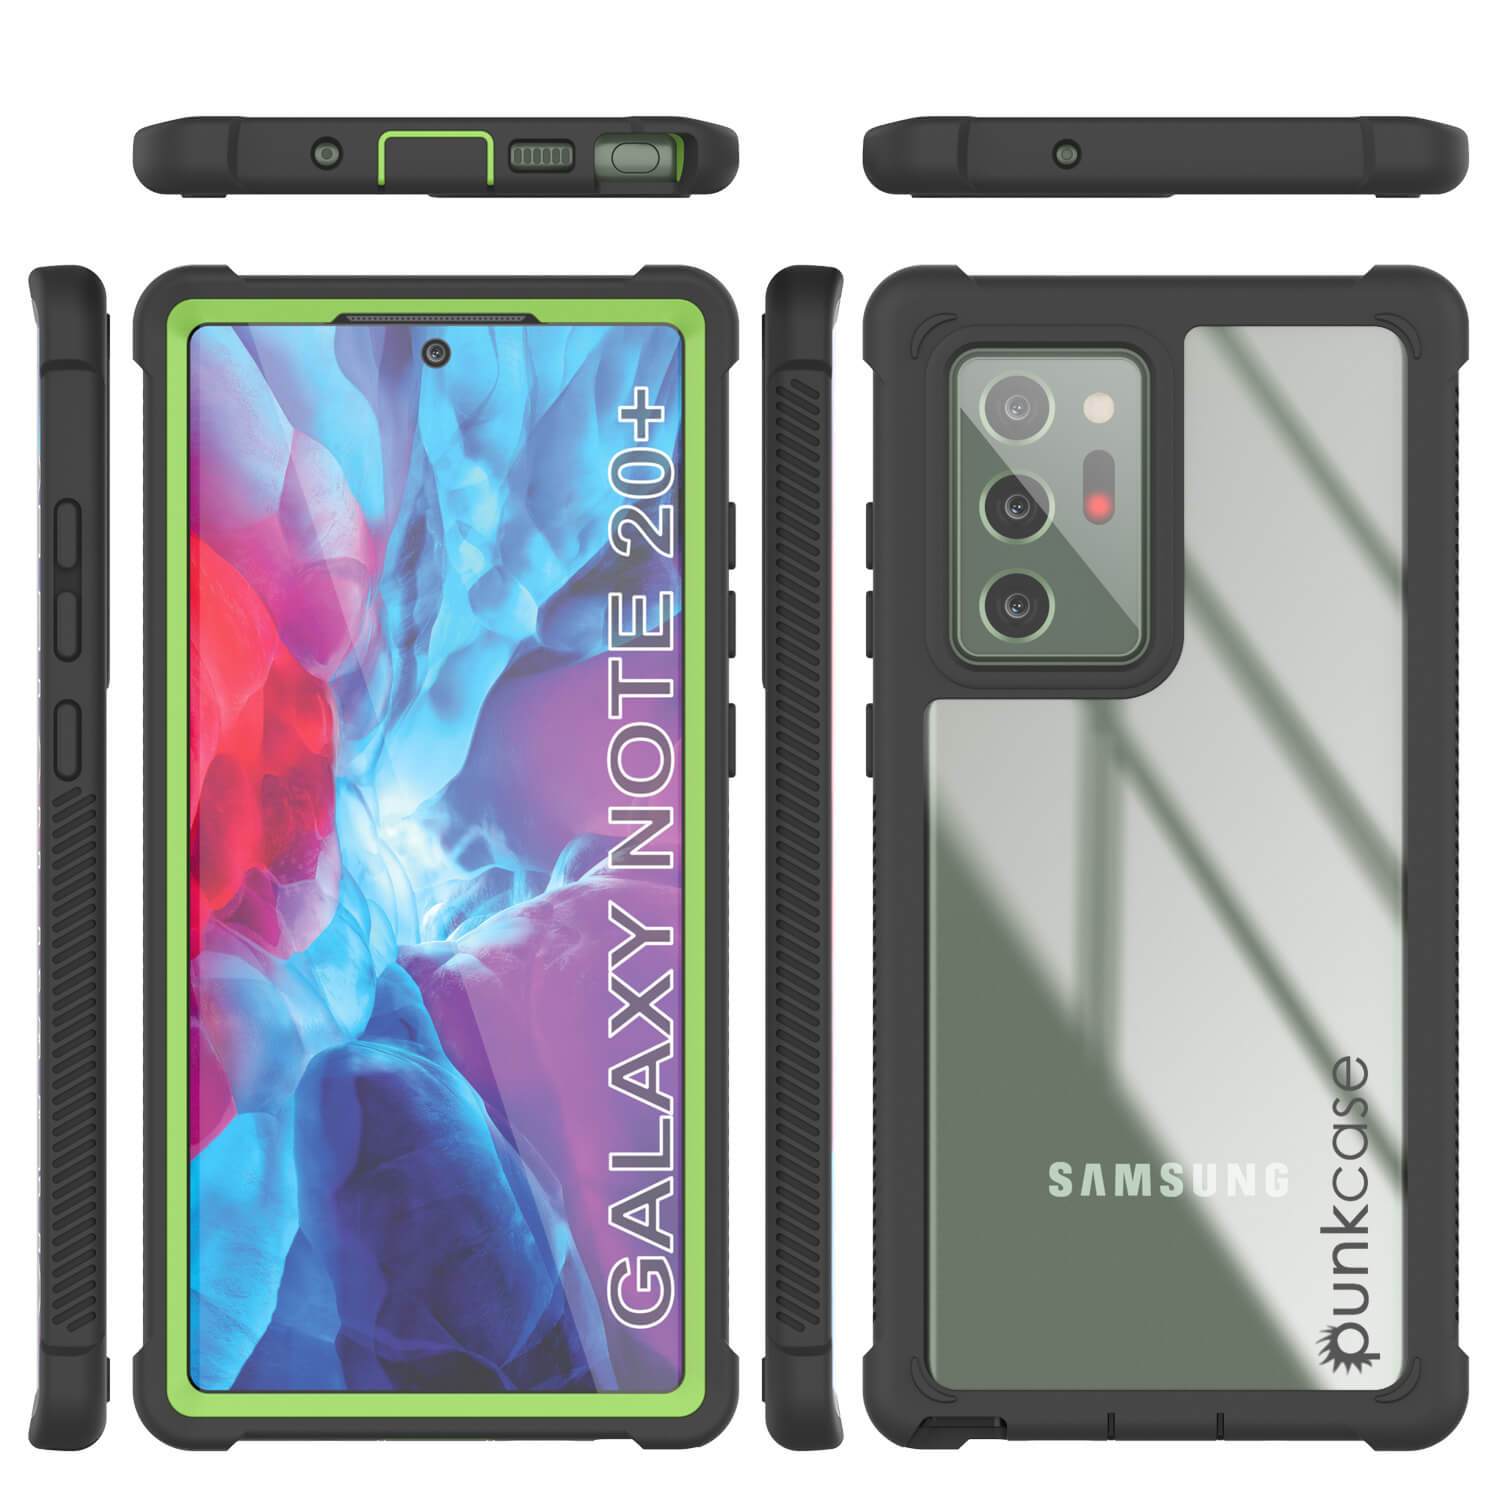 Punkcase Galaxy Note 20 Ultra Case, [Spartan Series] Light Green Rugged Heavy Duty Cover W/Built in Screen Protector